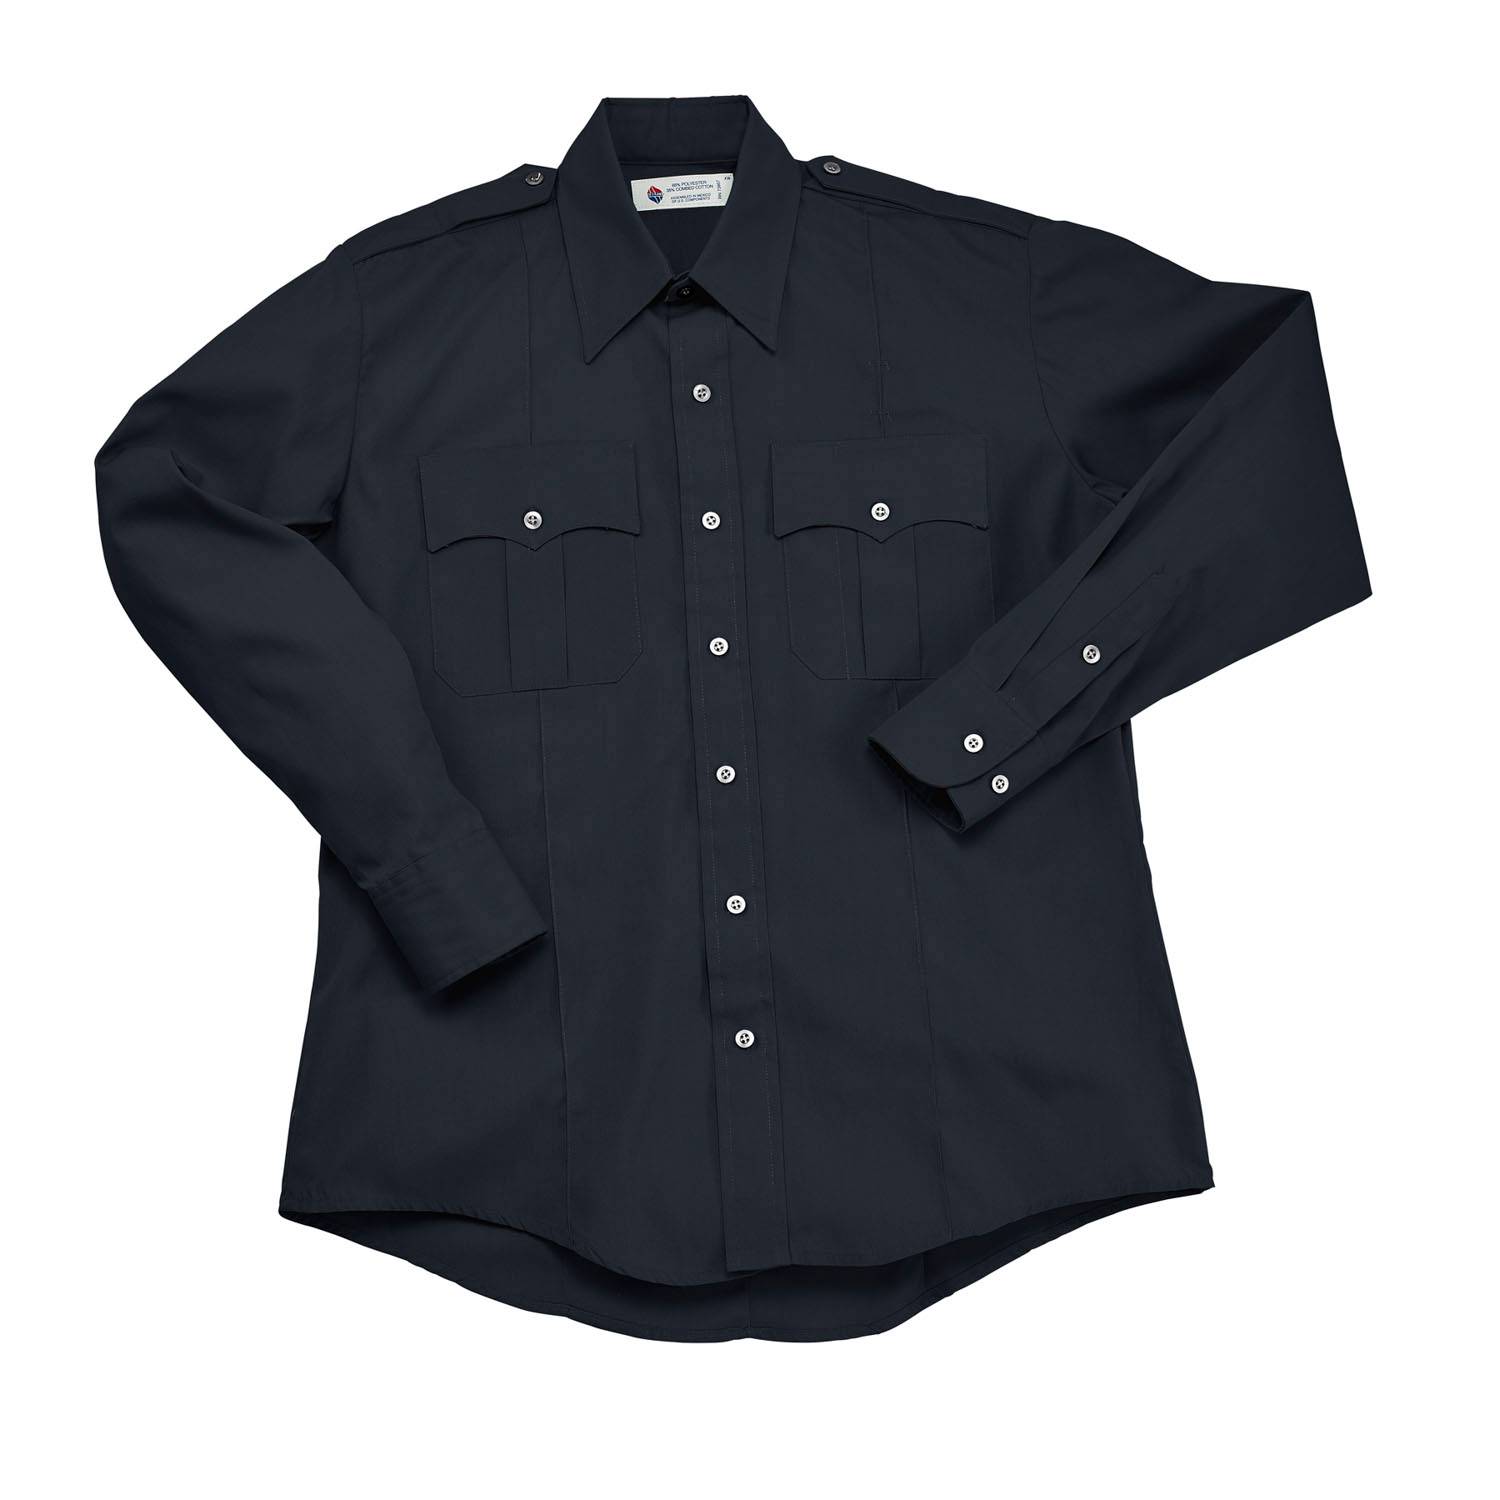 Liberty Uniform Polyester and Cotton Police Shirts